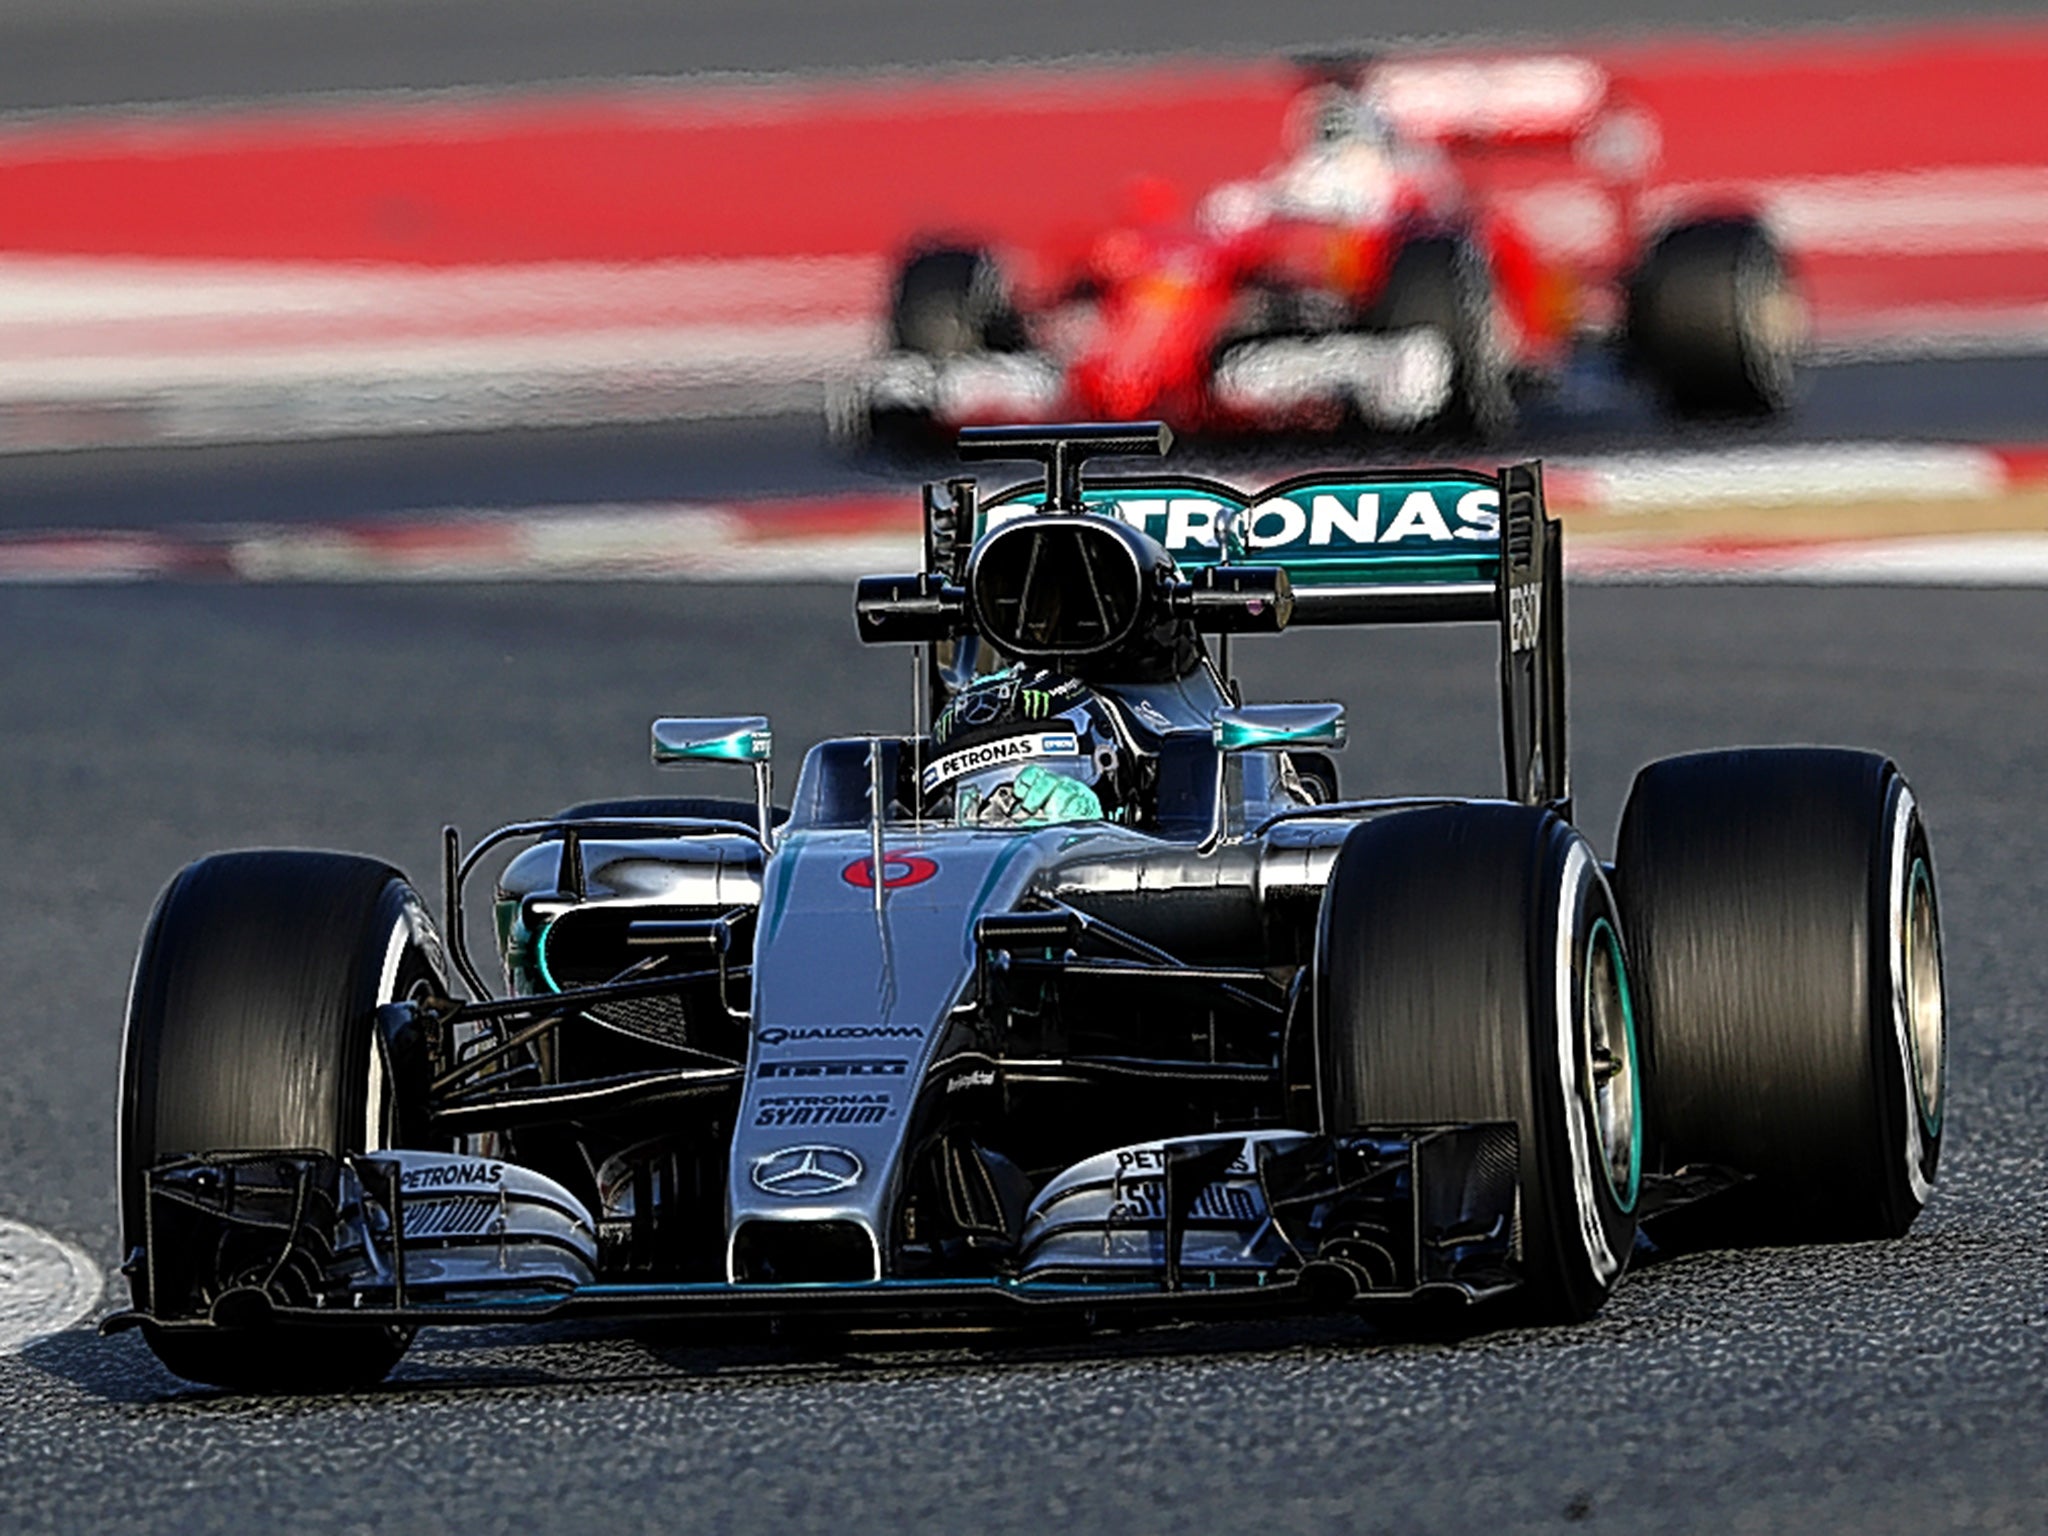 Nico Rosberg drove more than 800km on one day in Barcelona, doing 172 laps of the Circuit de Catalunya in his new Mercedes